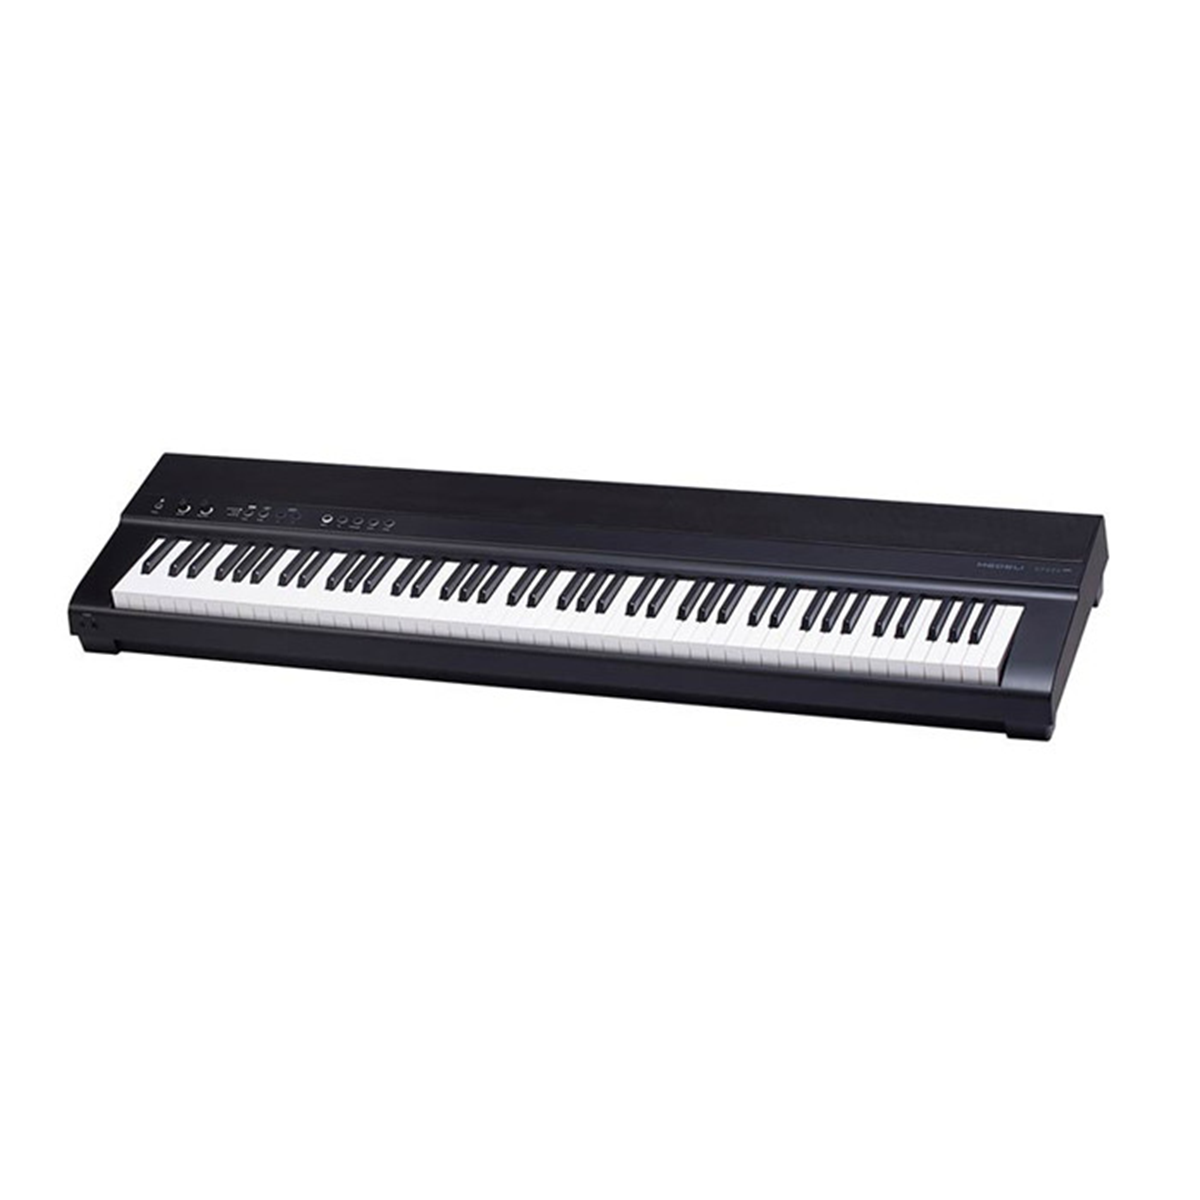 https://www.omega.be/images/ashx/medeli-sp201-stage-piano-w-bluetooth-88-touches-bin1.jpeg?s_id=MEDEE2D47B&imgfield=s_imagebin1&imgwidth=1200&imgheight=1200